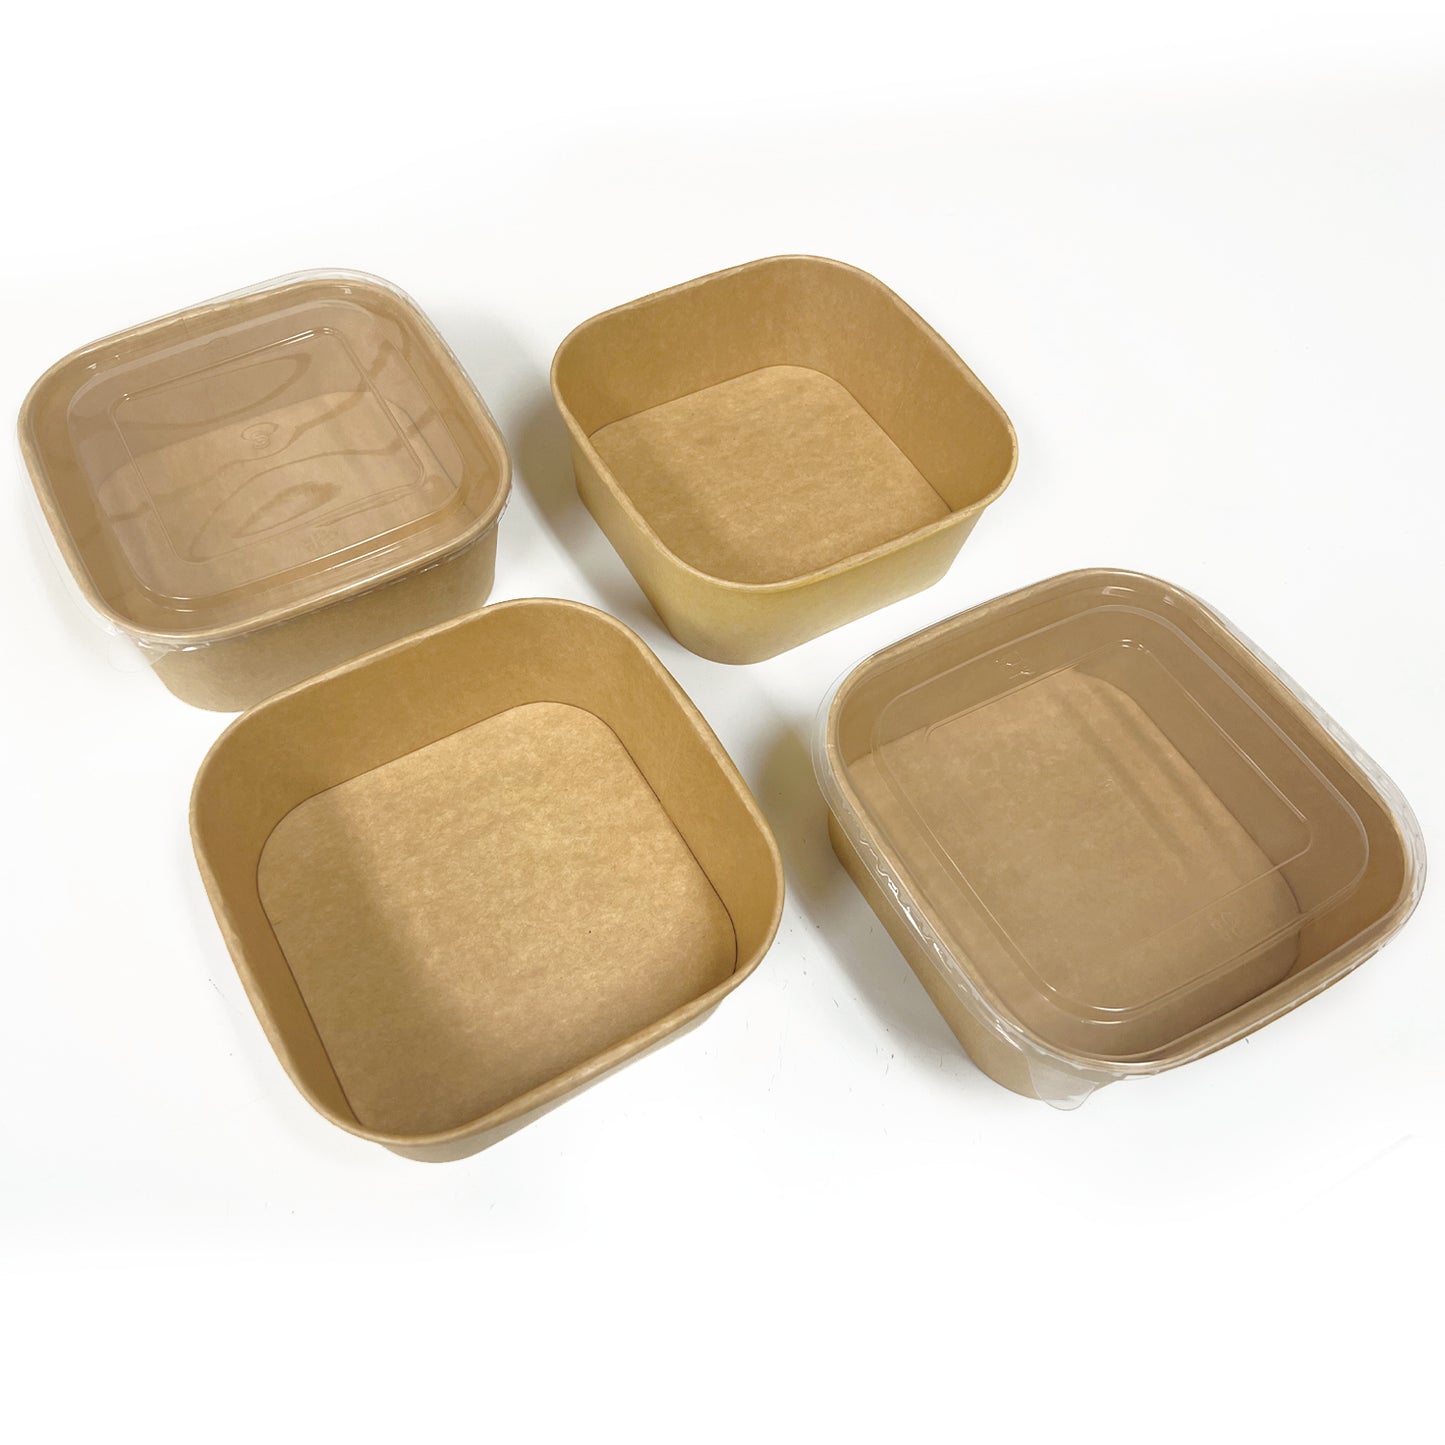 50 Sets/300 Sets, 44oz, 1300ml, Kraft Paper Square Containers, with PP Lids